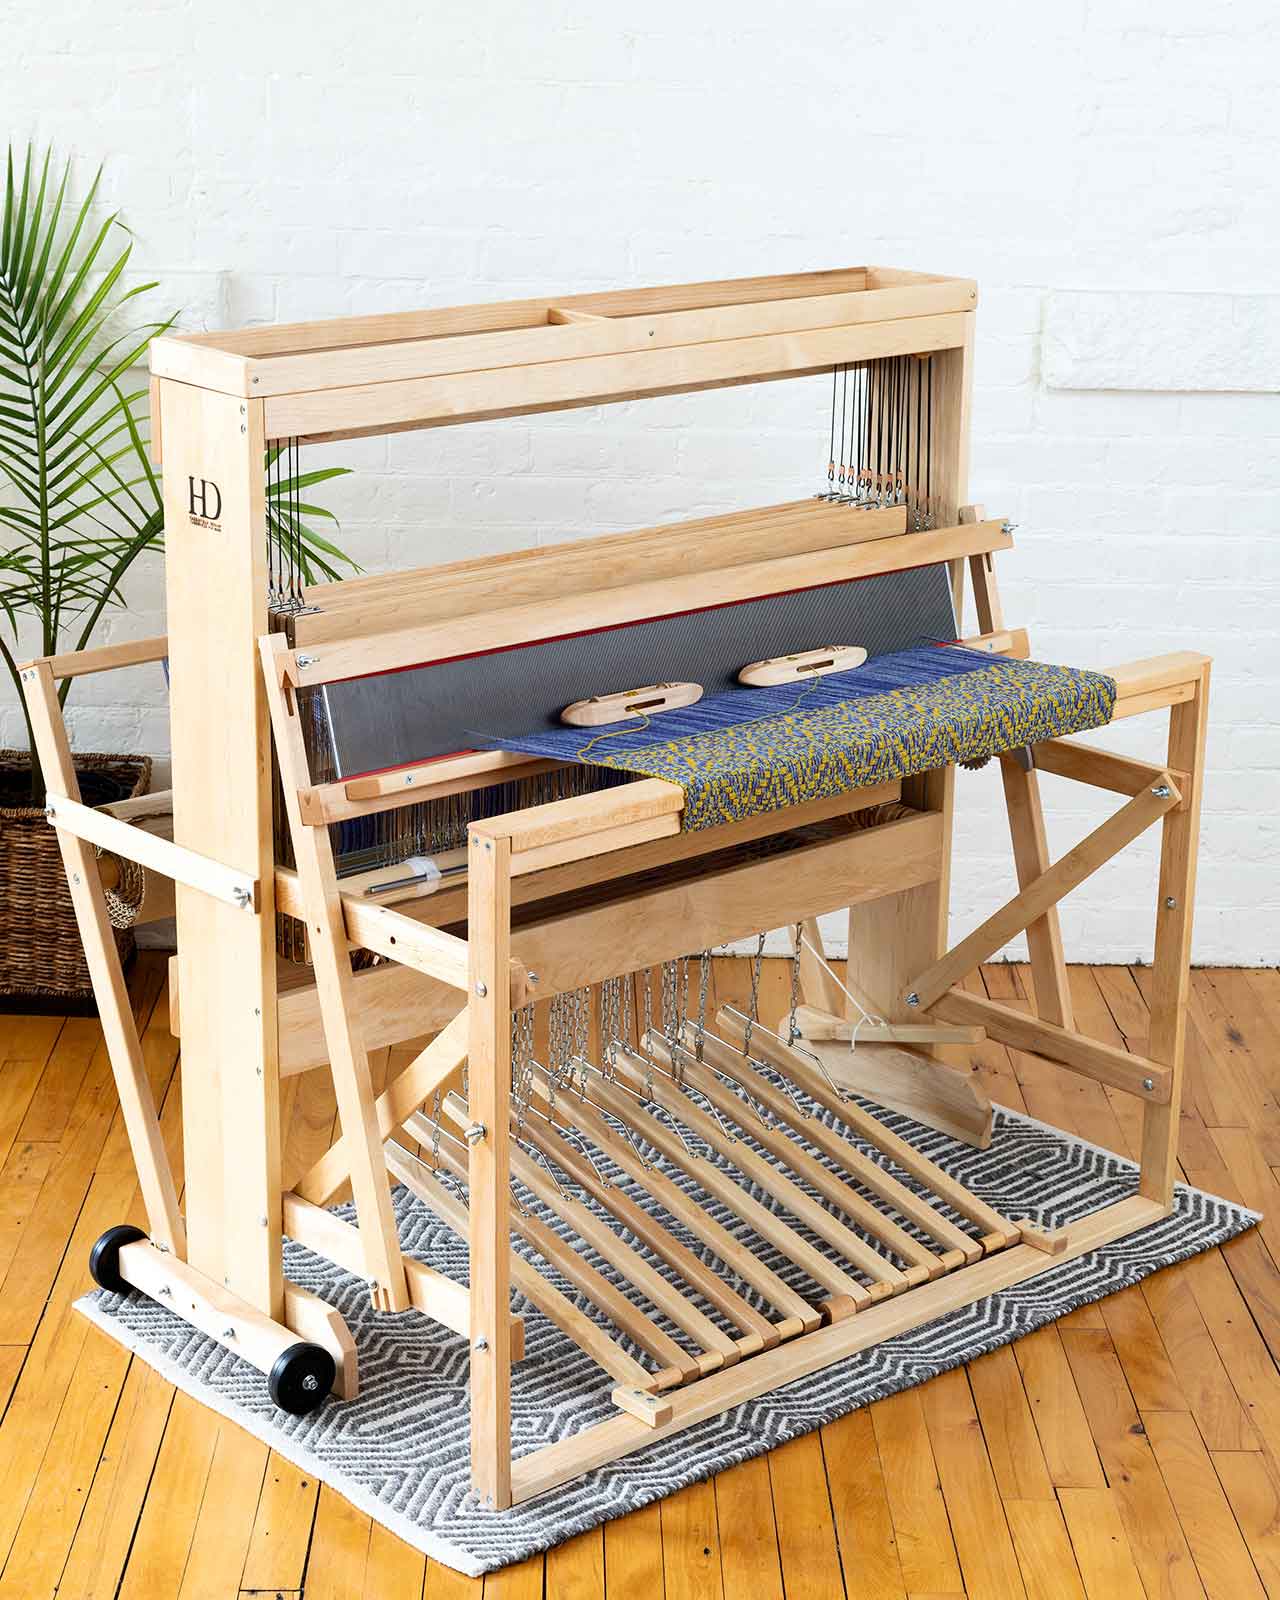 Floor loom with blue and yellow weaving project